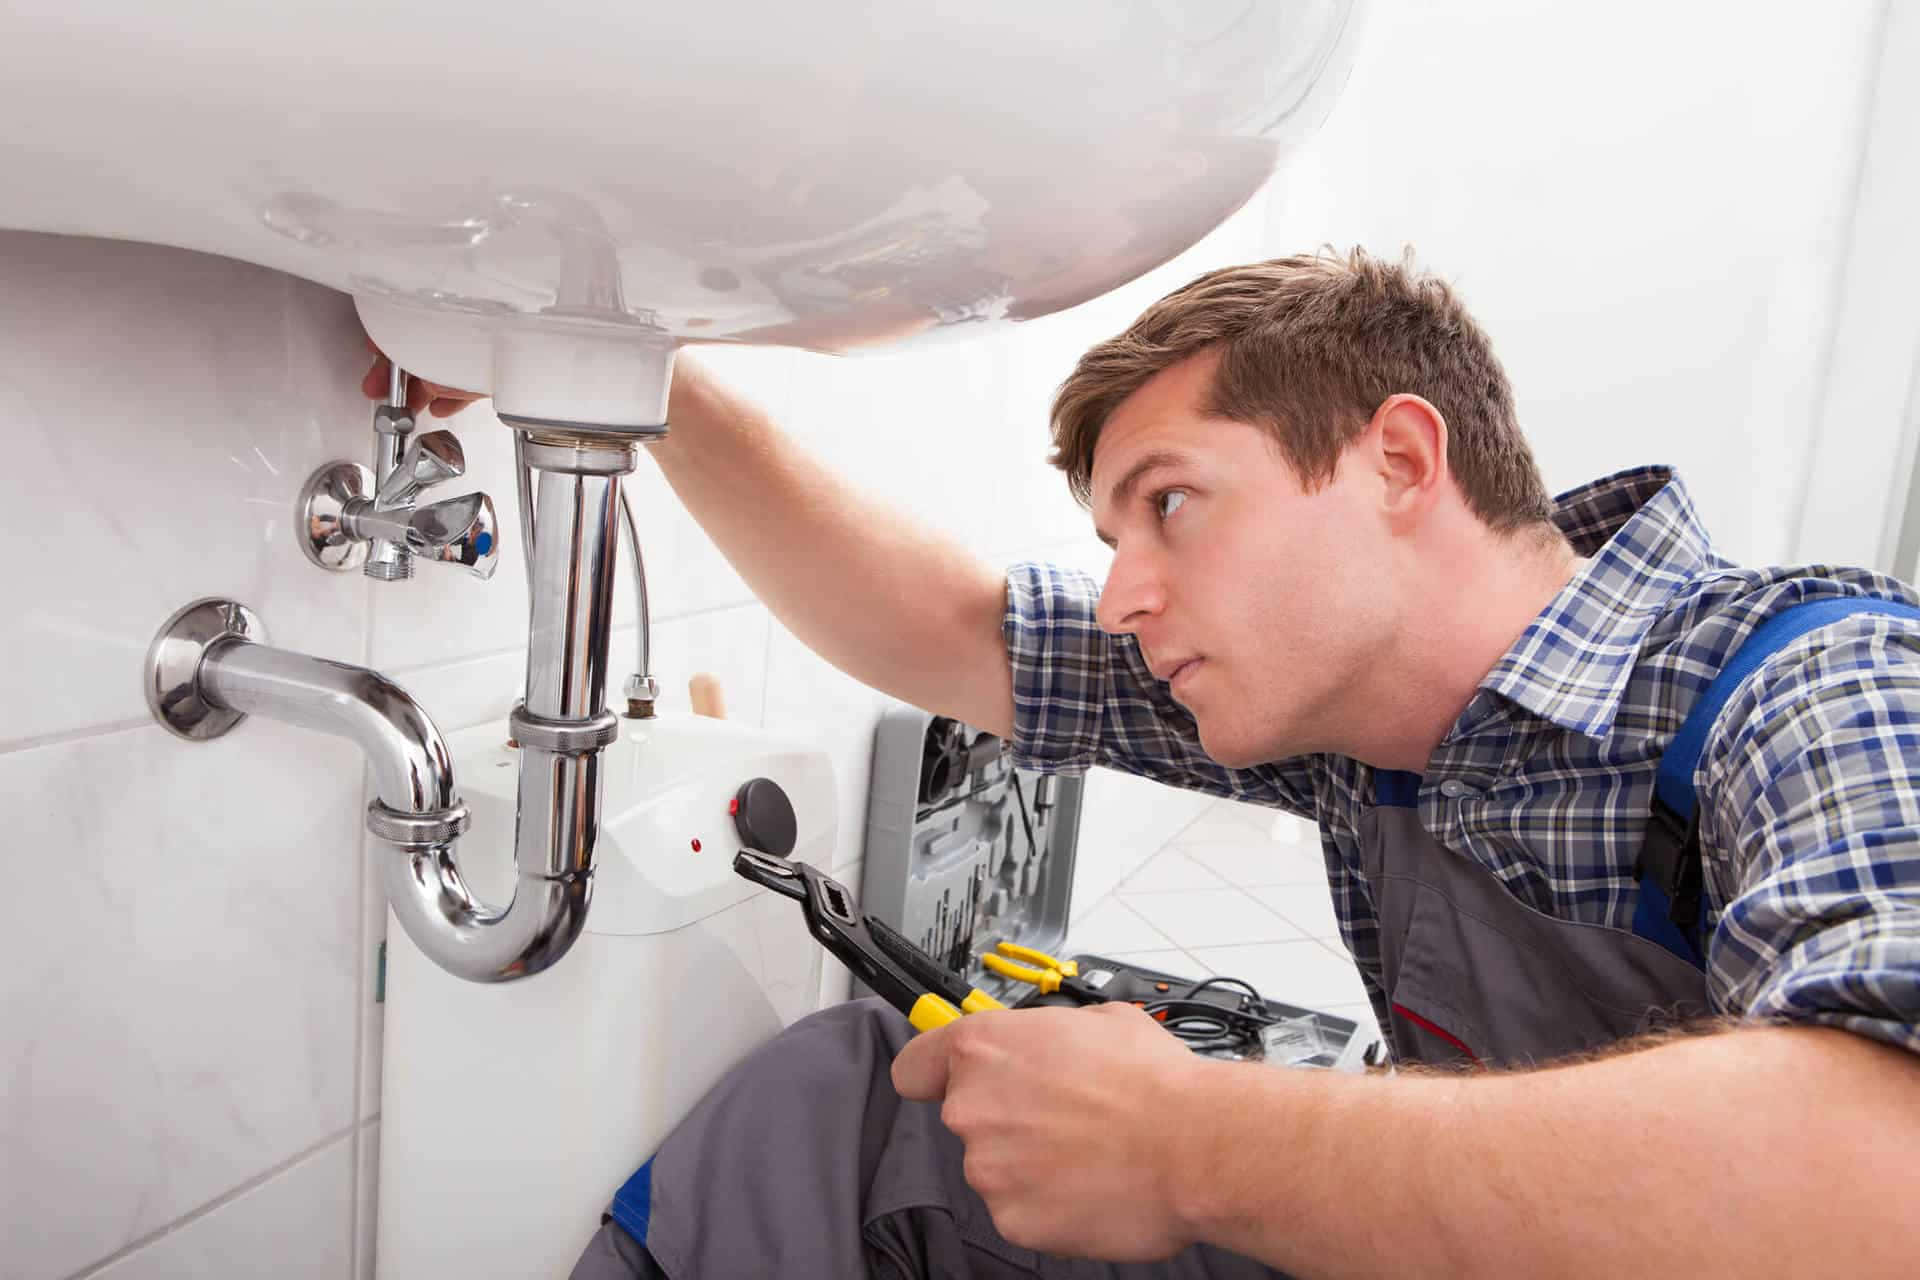 Professional Plumber Fixing a Pipe